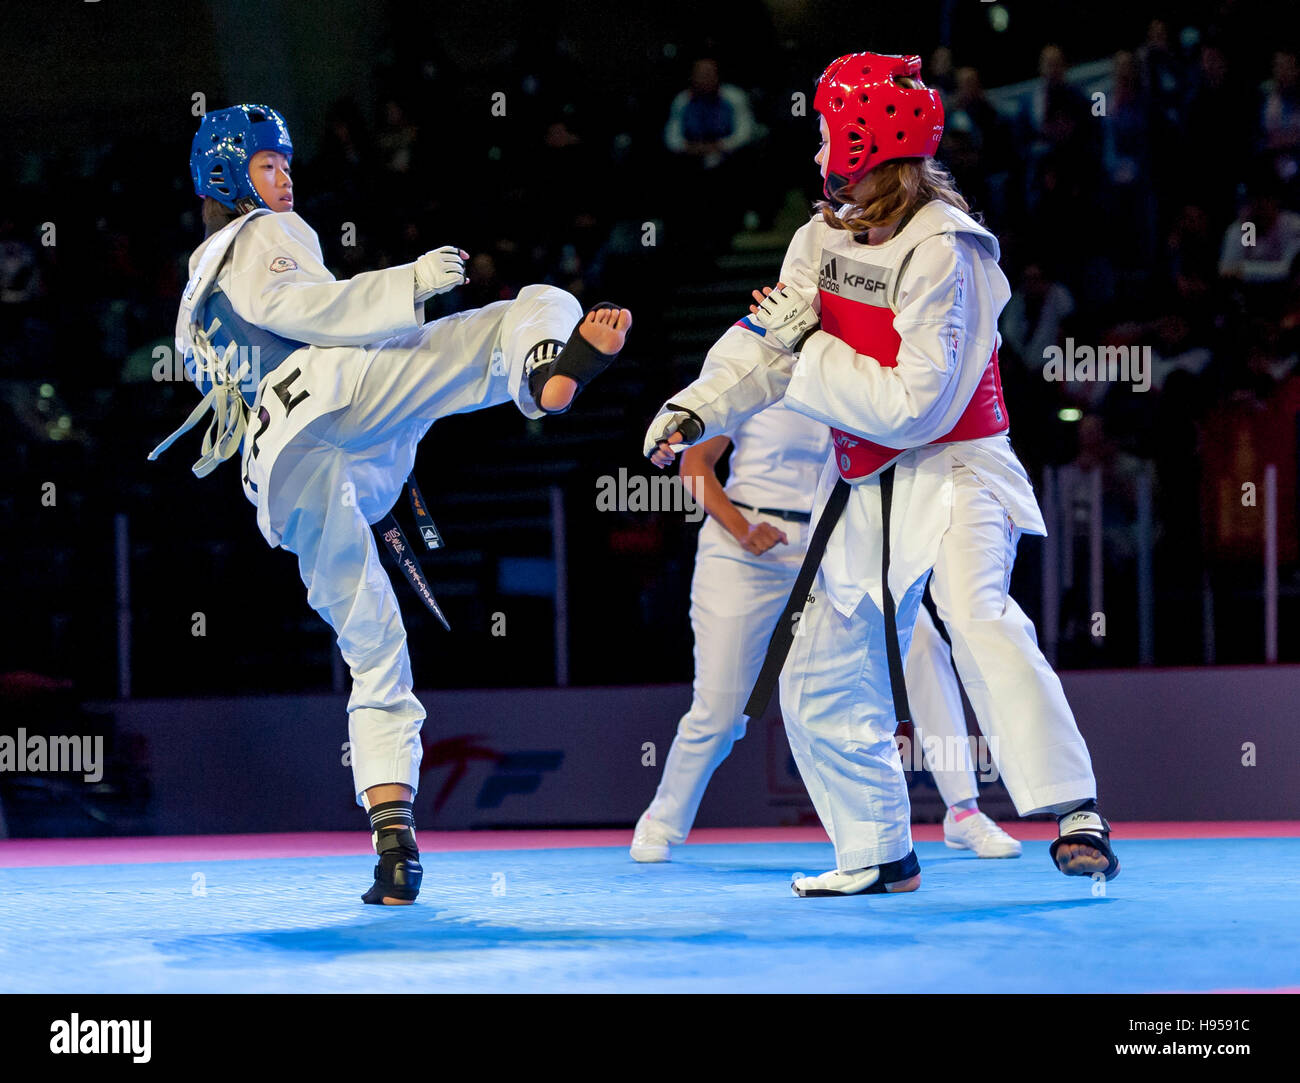 Burnaby, Canada. 18 November, 2016. WTF World Taekwondo Junior Championships Cia-Ling Lo (TPE) and Ekaterina Kvartalnaia (RUS) red compete in the final of female 52kg won by Lo Alamy Live News/ Peter Llewellyn Stock Photo